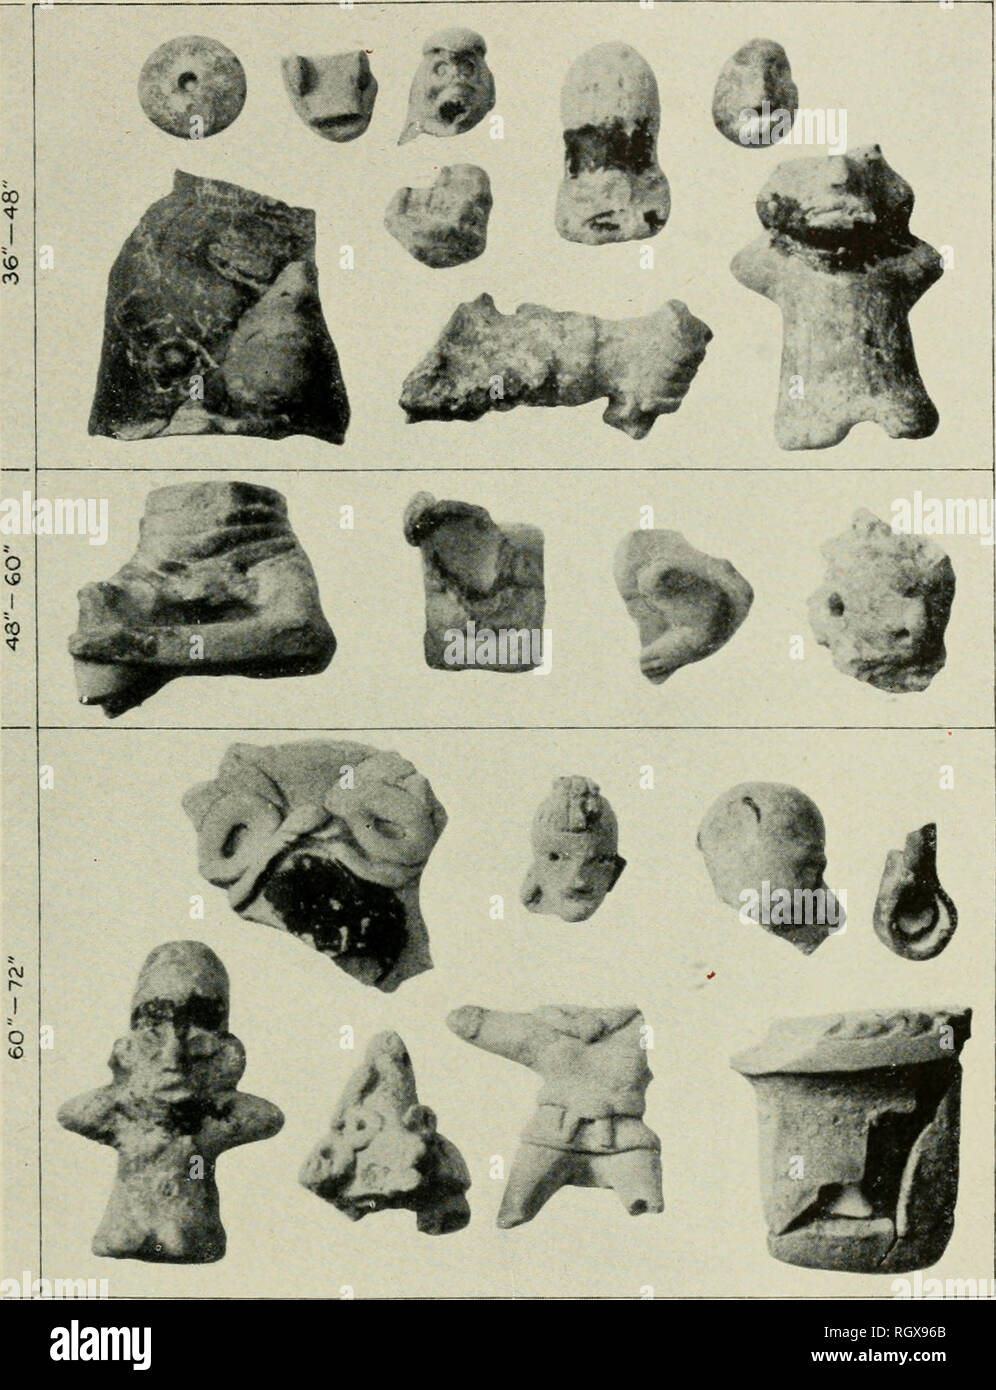 . Bulletin. Ethnology. BUREAU OF AMERICAN ETHNOLOGY BULLETIN 141 PLATE 56. Stratigraphic Material From Trench 13. 36- to 48-in:li le'el: (Upper row) mold-made spindle whorl, aberranl snake head, t}-pe I-X, type I-G, aberrant type; (center) t'pe V'll; (lower row) unique modeled face on olla neck suggests type I; hand possibi}' t'pe X; t 'pe 1-6. 48- to 60-inch level: Type IV-A, tpe IV or V, unidentified, type I variant. 69- to 72-inch level: (Upper row) tpe IV-A, t}pe I-A variant, t-pe I-X, double ring; (lower row) type I-G, type 1-H, l&gt;pc IV-A body, hollow slab leg.. Please note that Stock Photo